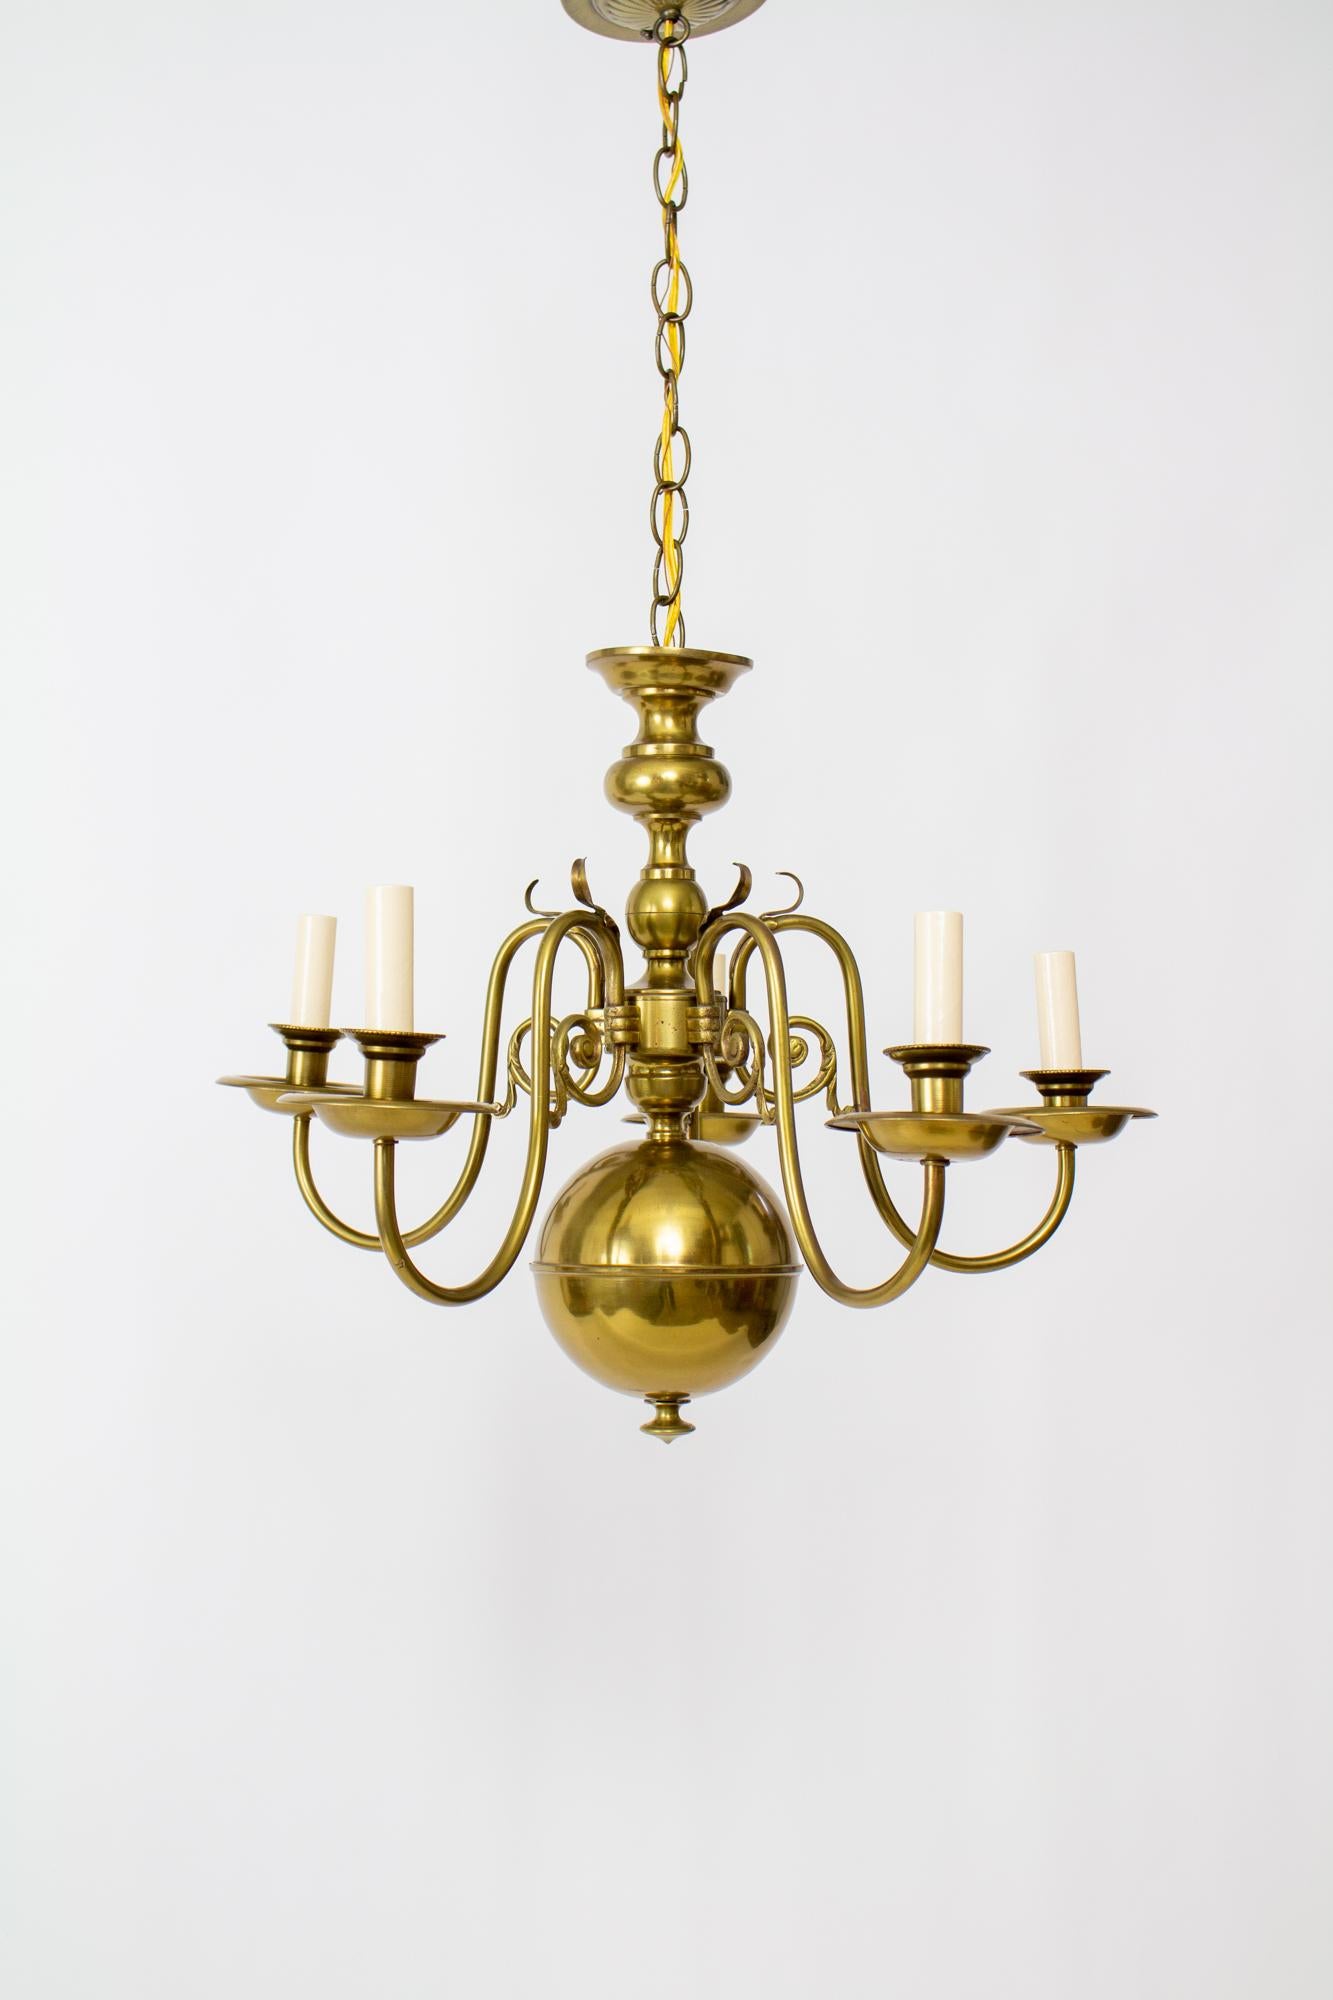 Mid-20th Century Dutch Colonial Style Brass Chandelier 1